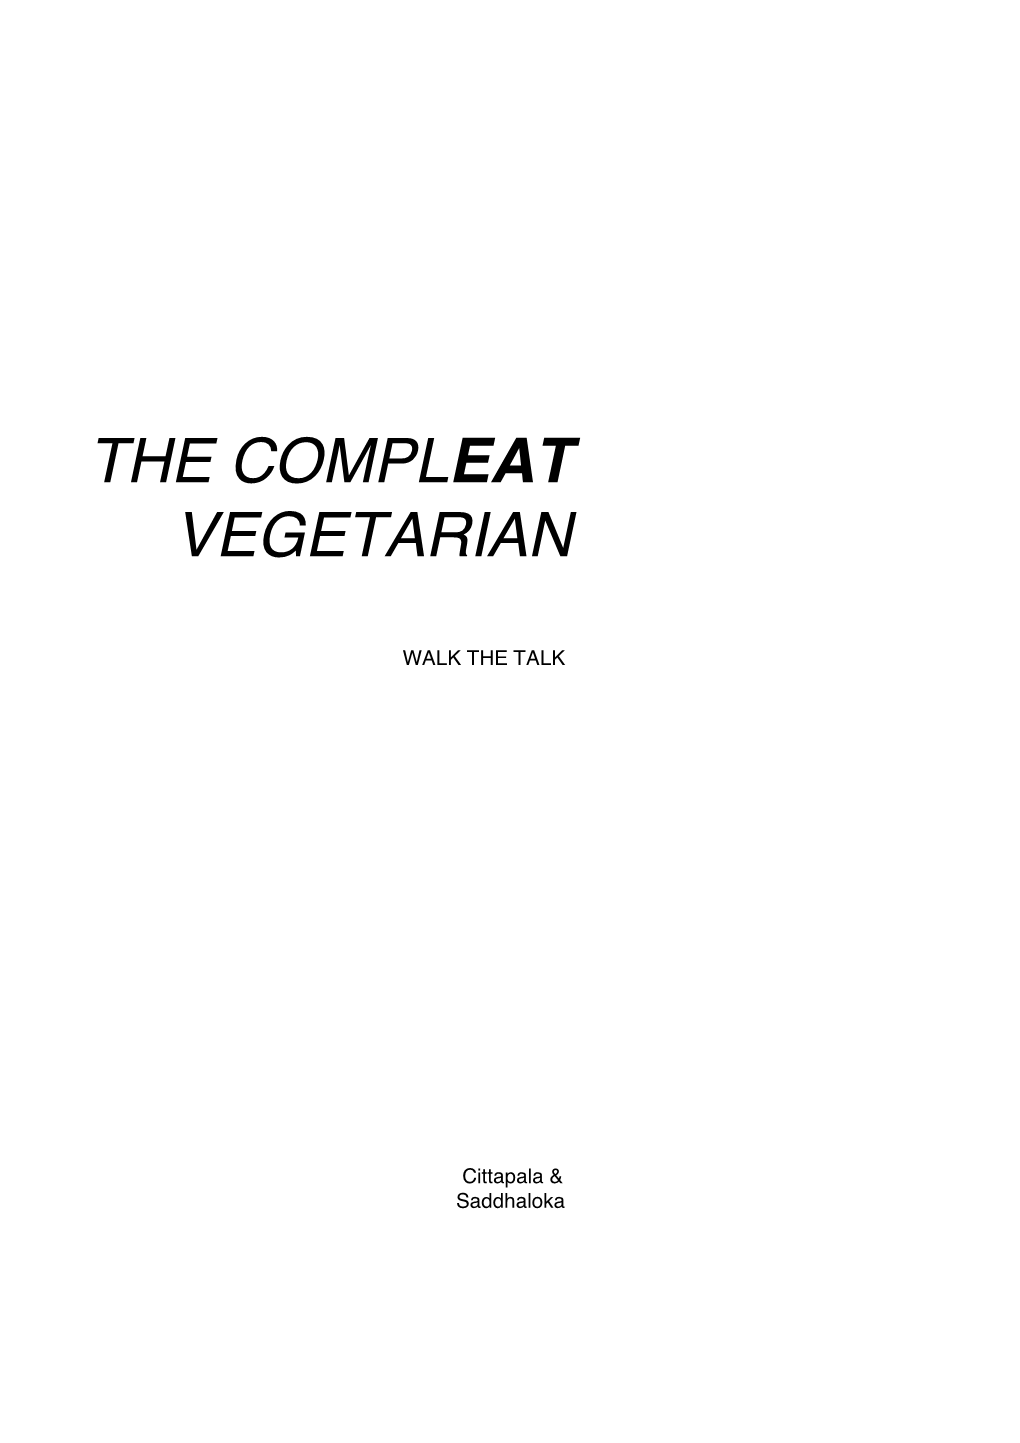 The Compleat Vegetarian